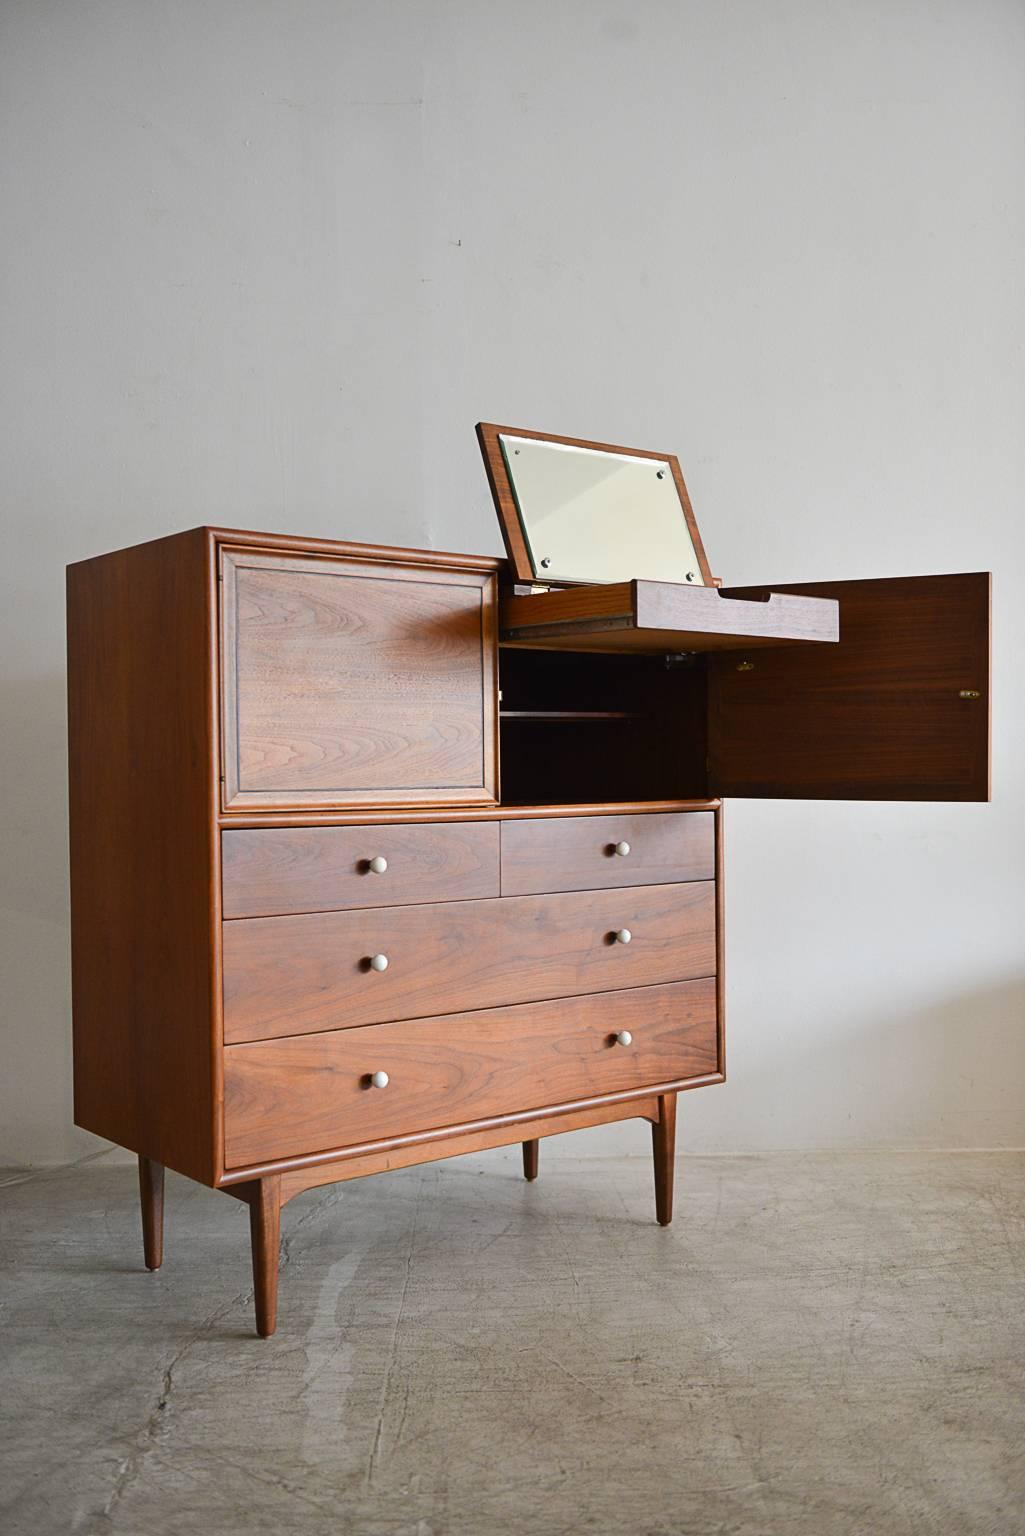 Fully restored gentlemen's highboy dresser by Kipp Stewart for Drexel Declaration. American walnut with original porcelain hardware. Upper half opens to reveal sliding drawers on left and a pull-out mirrored drawer with built in dividers on right